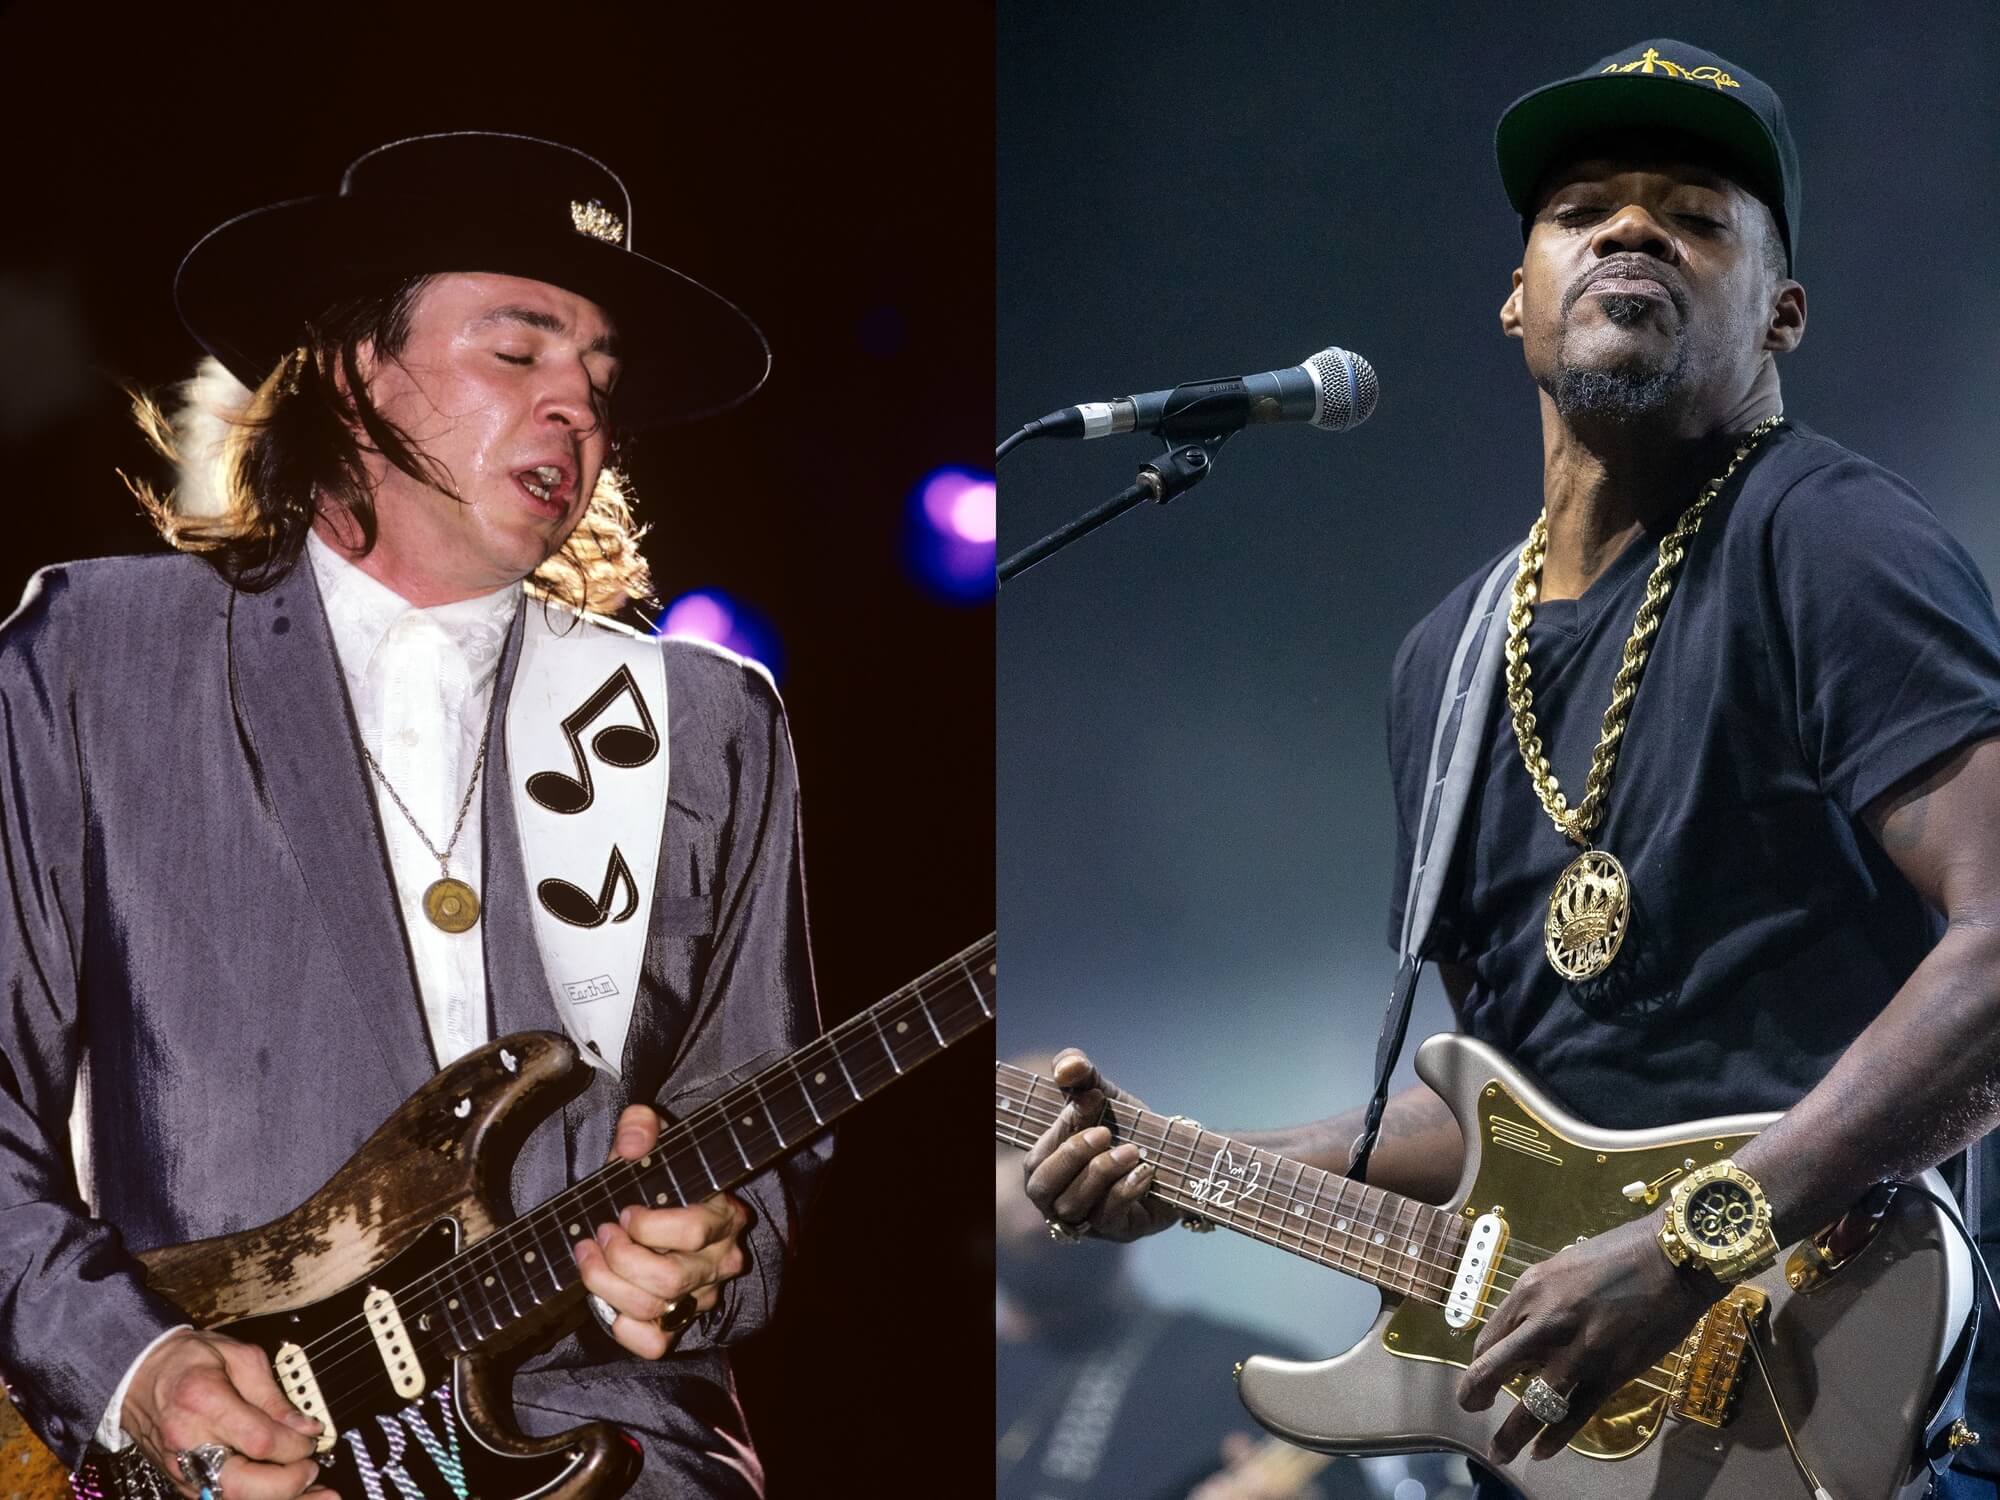 Stevie Ray Vaughan and Eric Gales